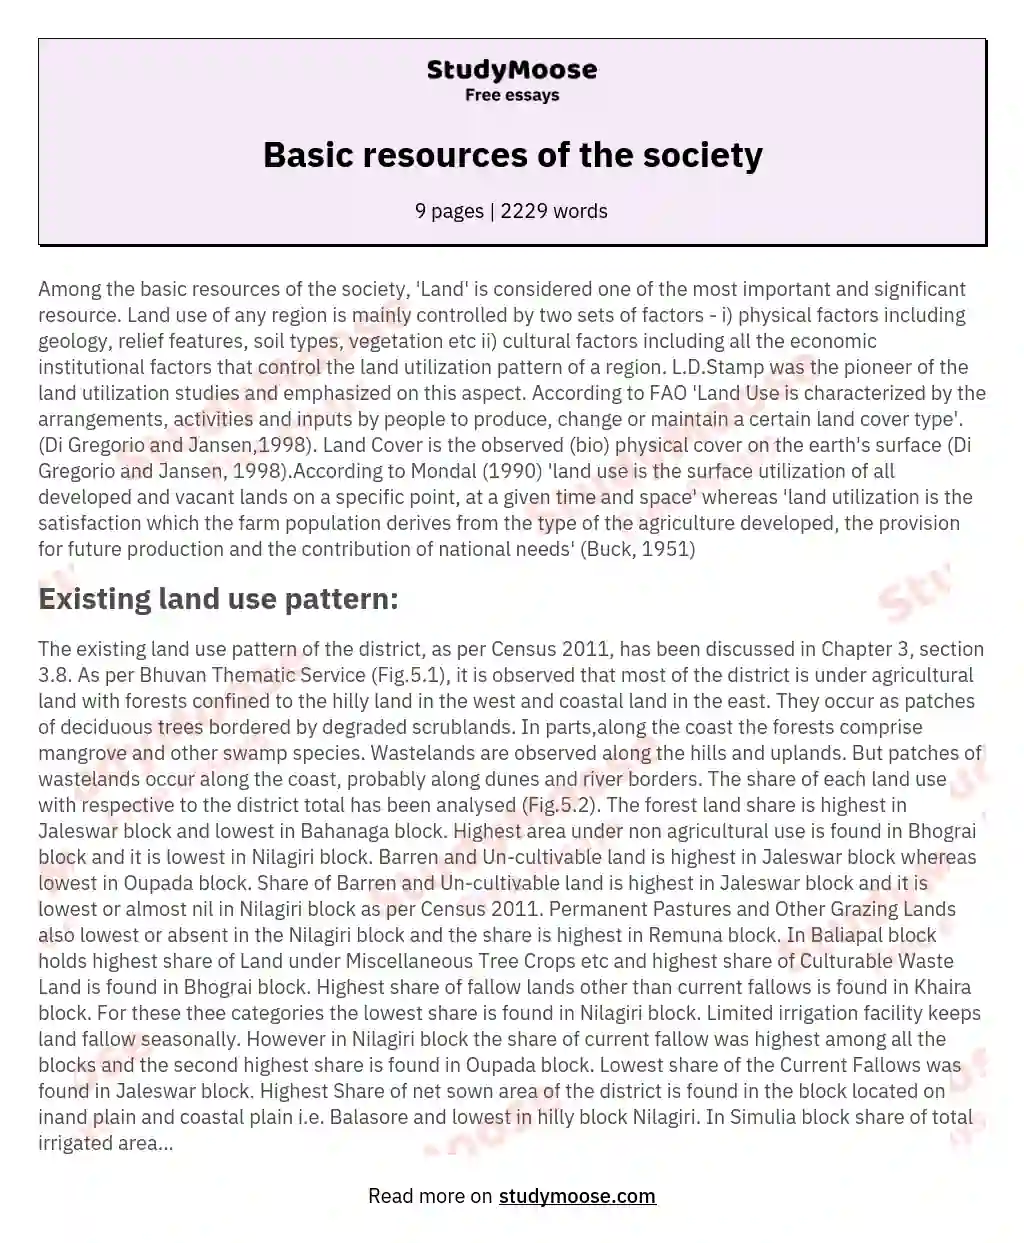 Basic resources of the society essay